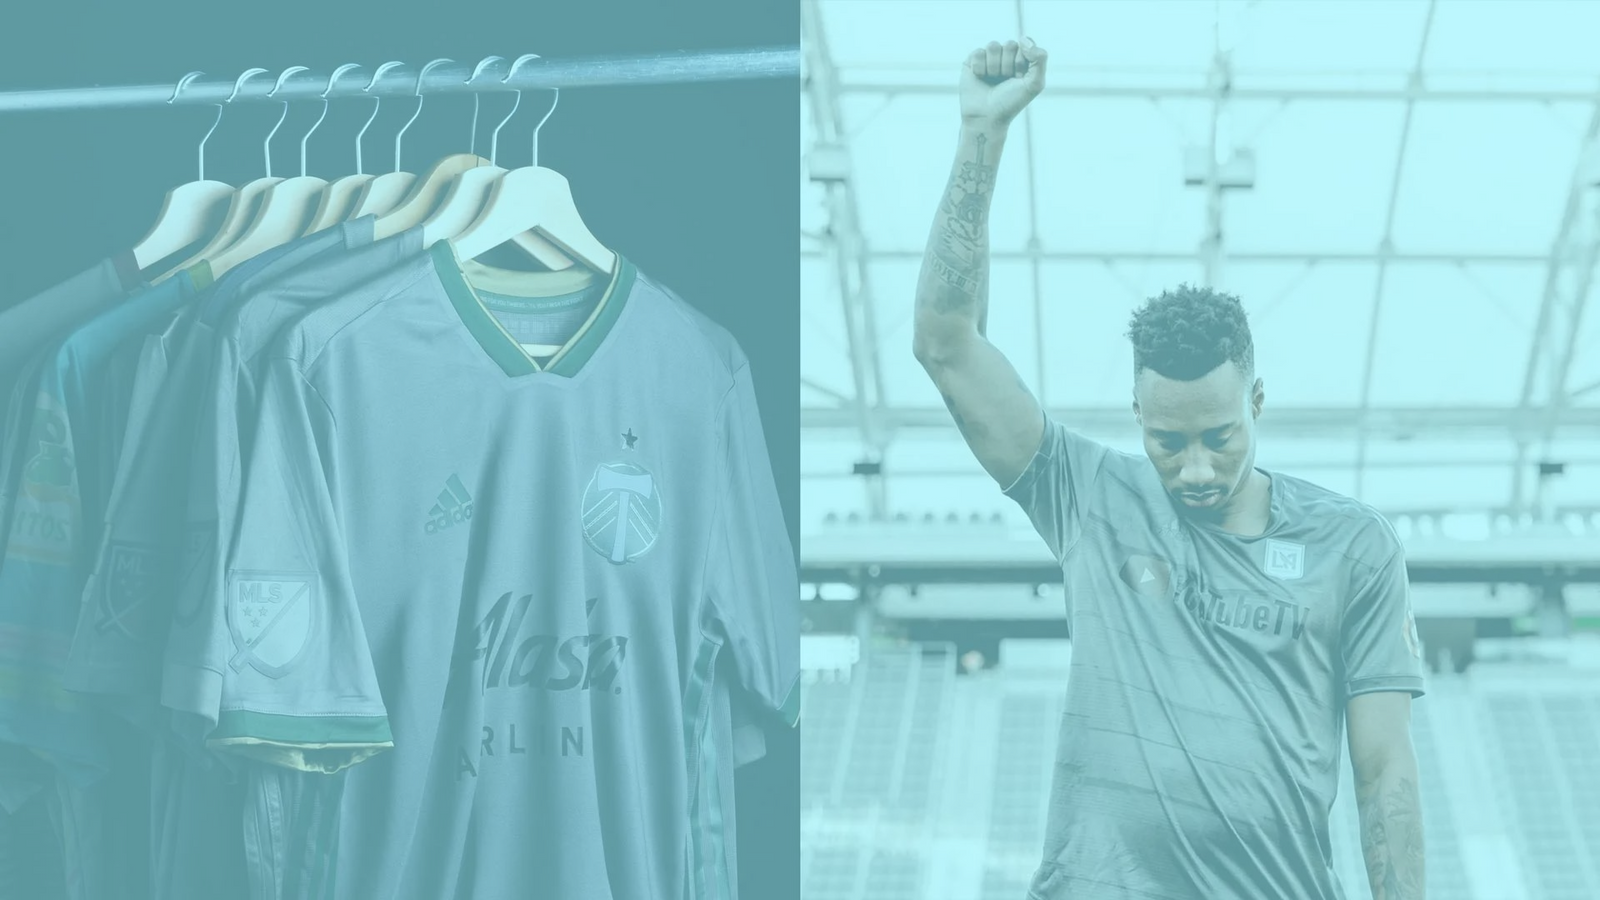 Celtic release new 2022-23 away kit with a retro '90s throwback design